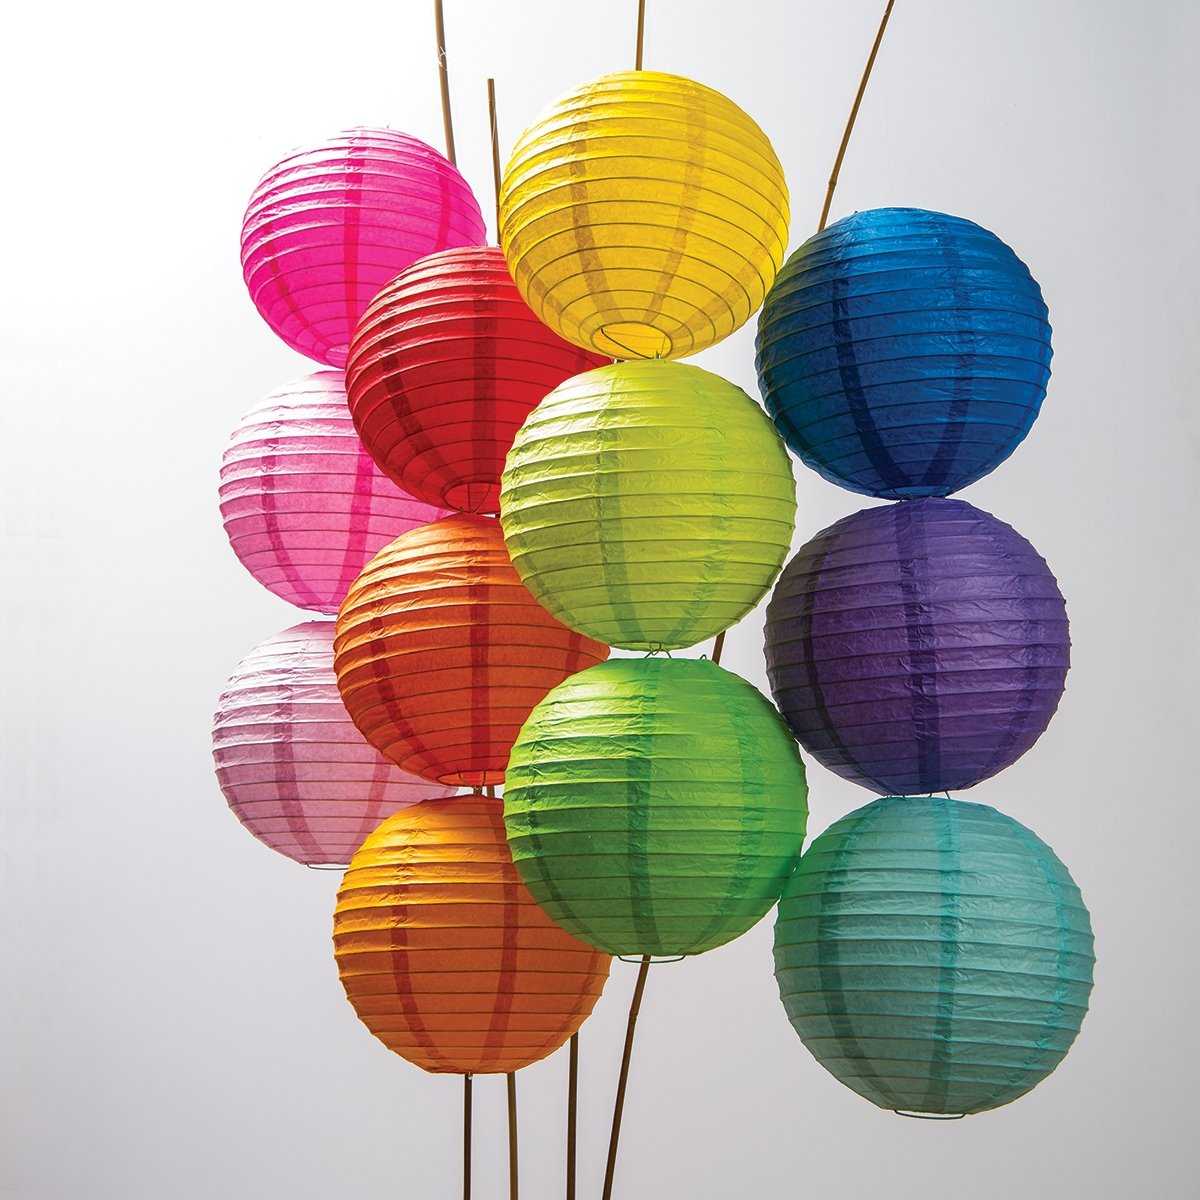 12-Pack of 10 Inch Multicolor No Frills Paper Lanterns - PaperLanternStore.com - Paper Lanterns, Decor, Party Lights & More